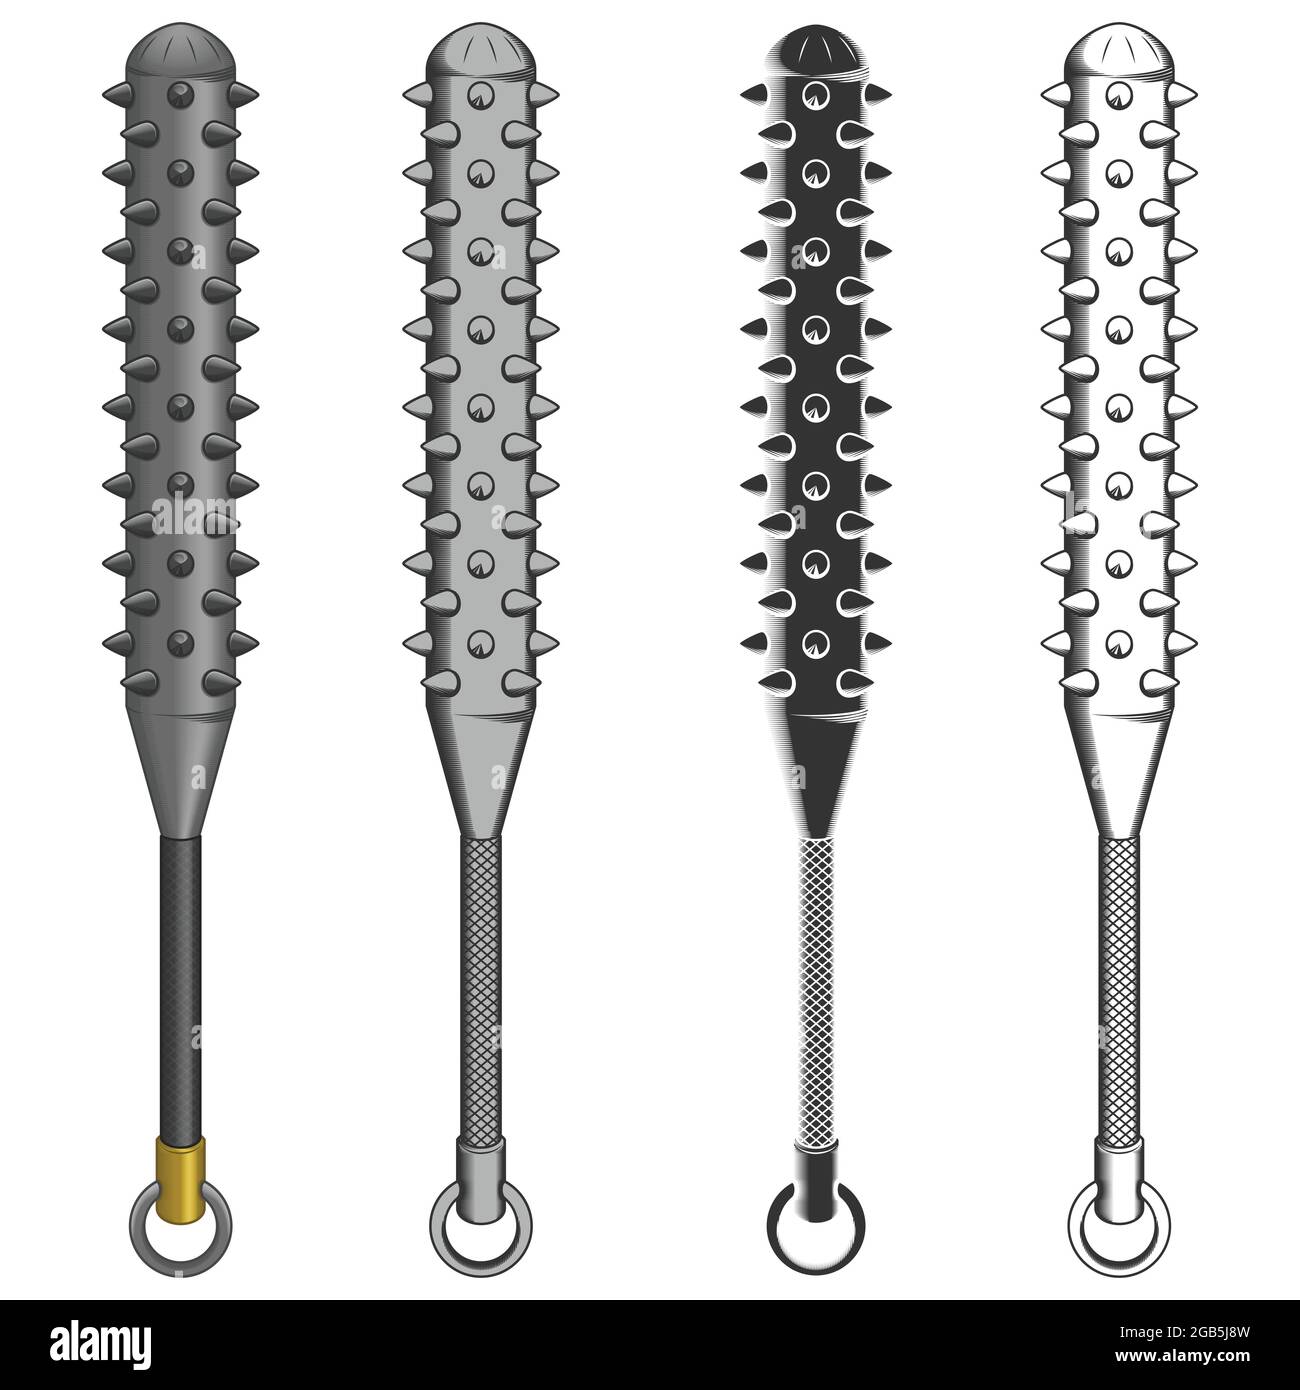 Kanabo Japanese Weapons vector design, Kanabo Japanese staff in different styles, Kanabo grayscale Stock Vector